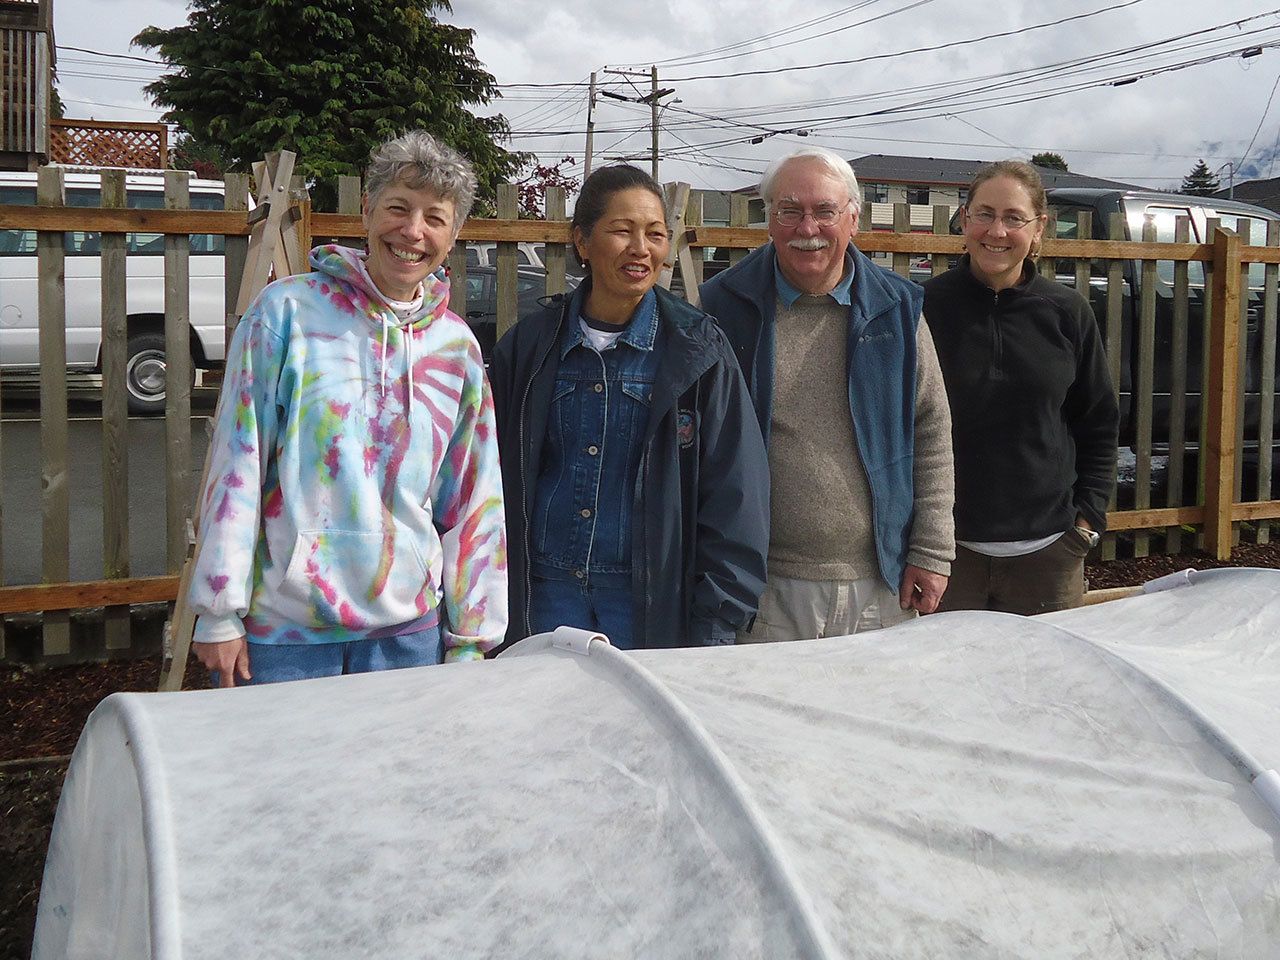 Master Gardeners, from left, Jeanette Stehr-Green, Audreen Williams, Bob Cain and Laurel Moulton will lead a one-hour walk through the Fifth Street Community Garden on Sept. 9. (Clallam County Master Gardeners)